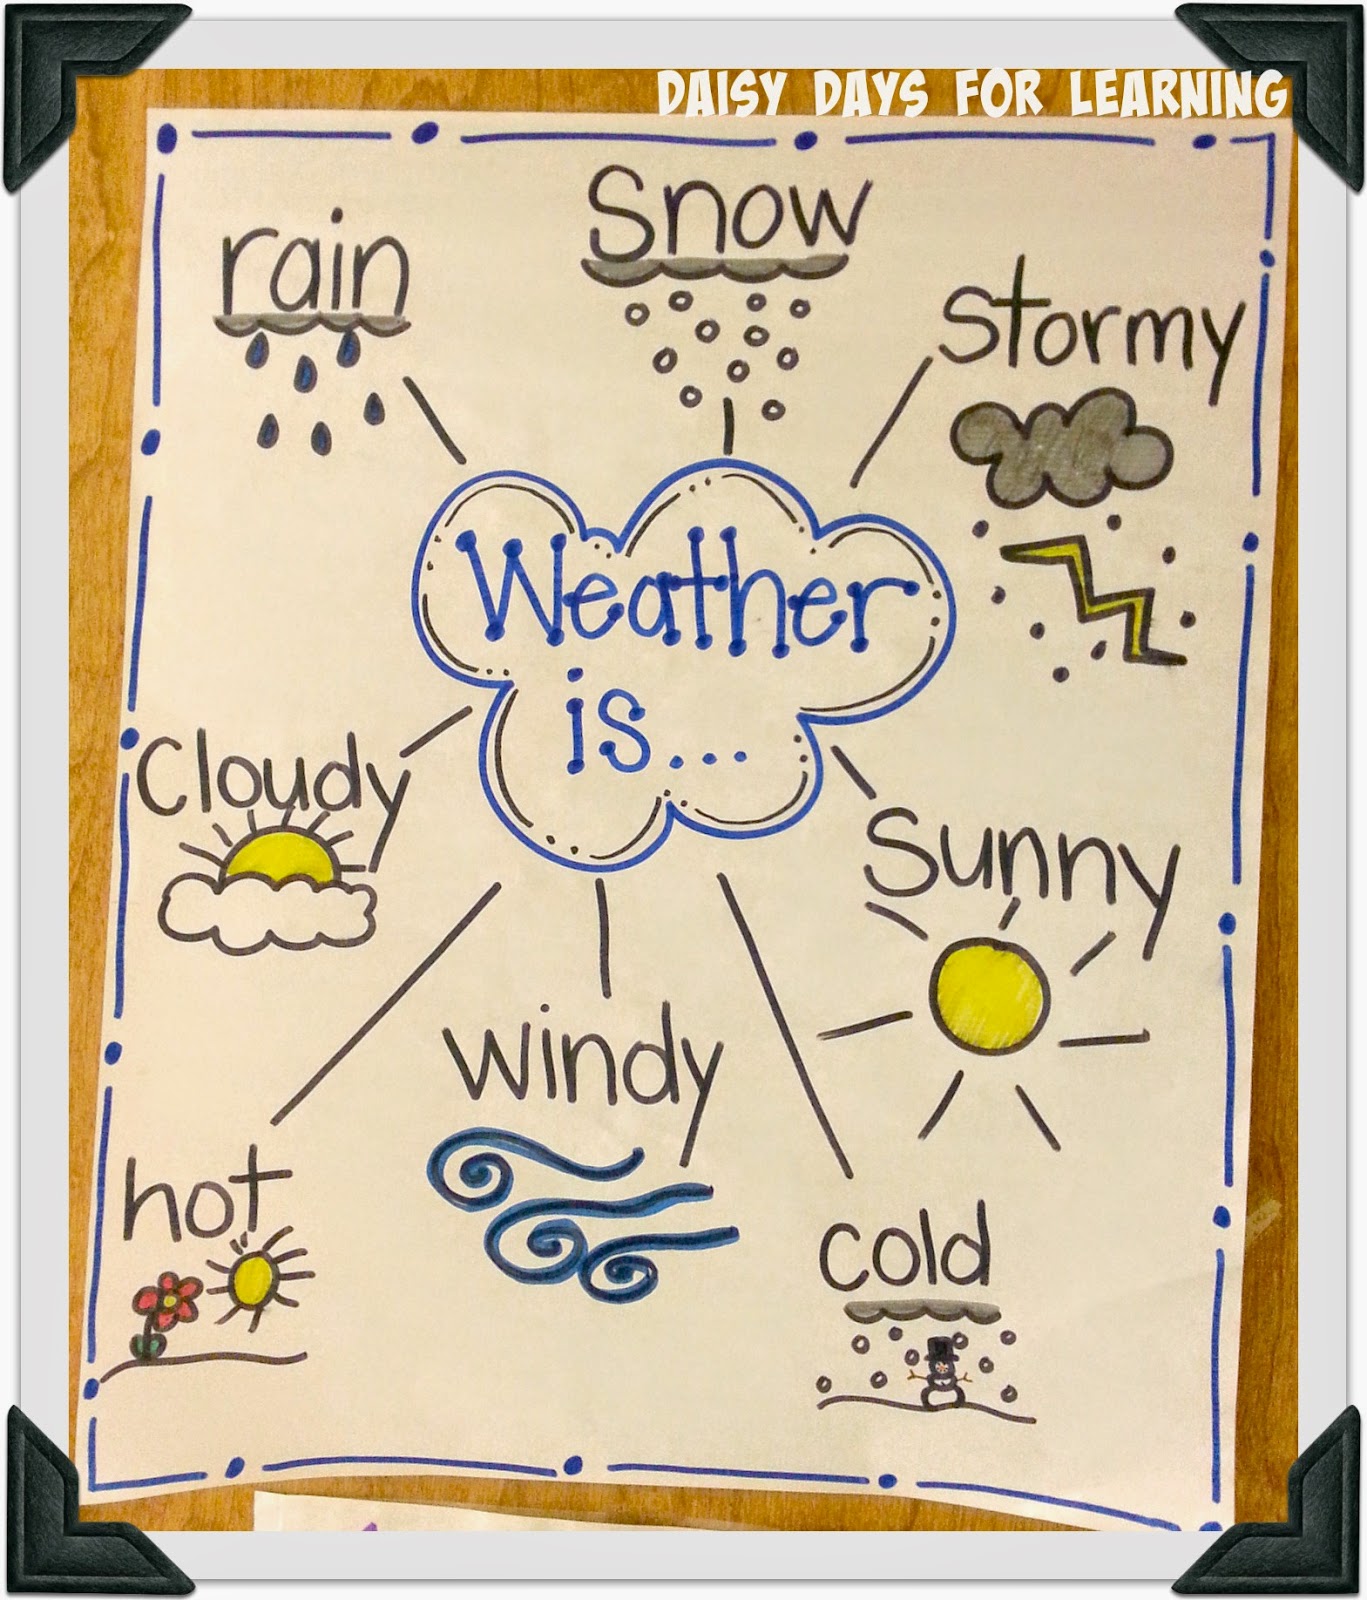 Daisy Days for Learning: Polar Bears and Weather